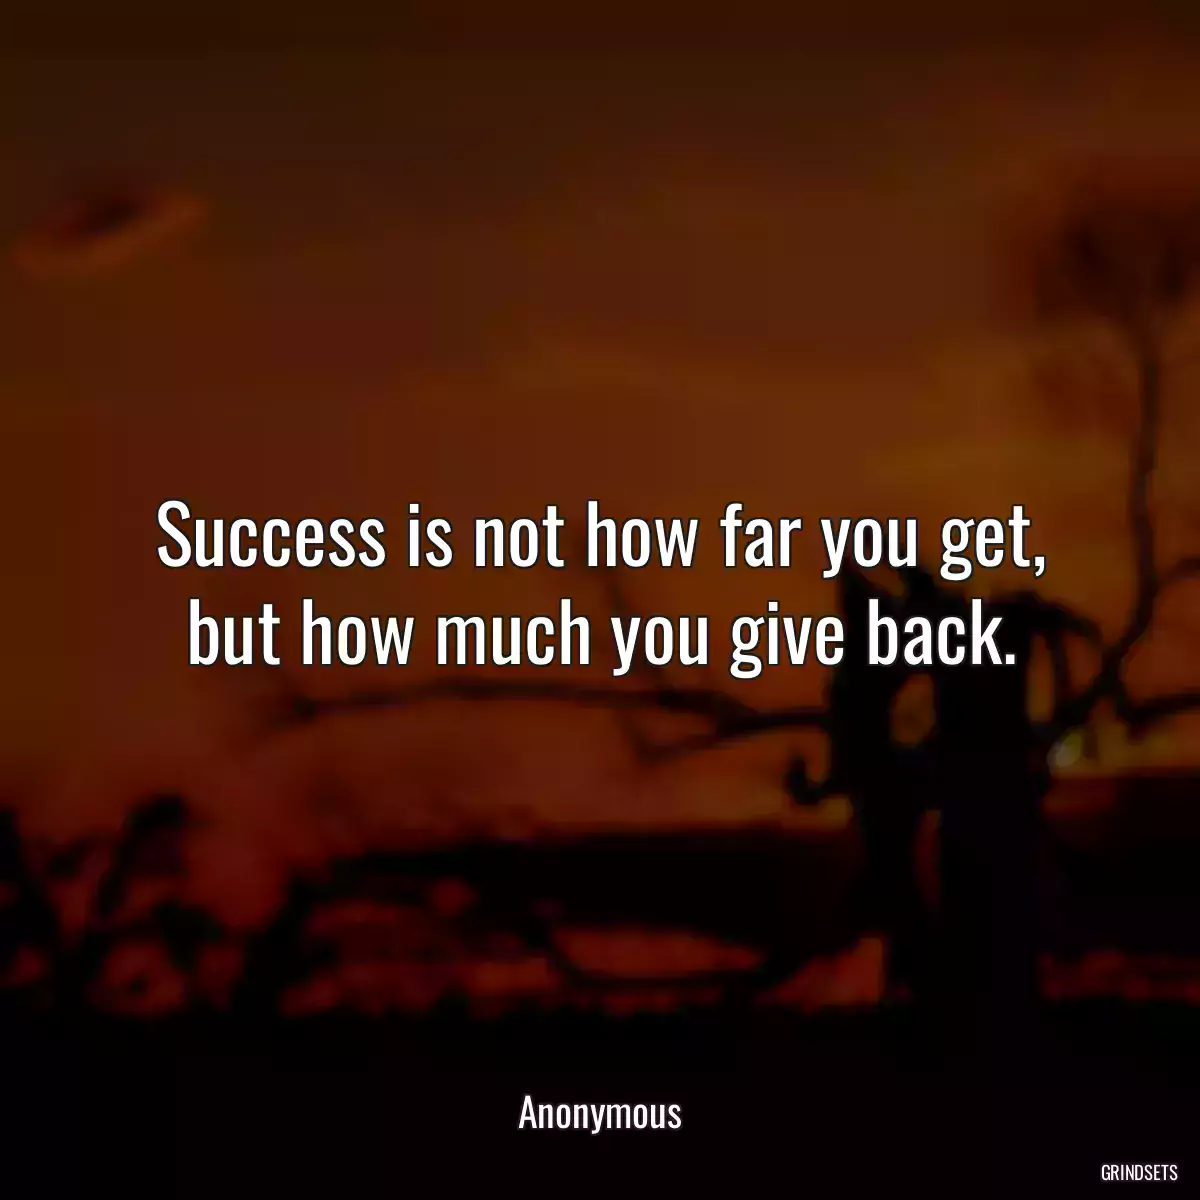 Success is not how far you get, but how much you give back.